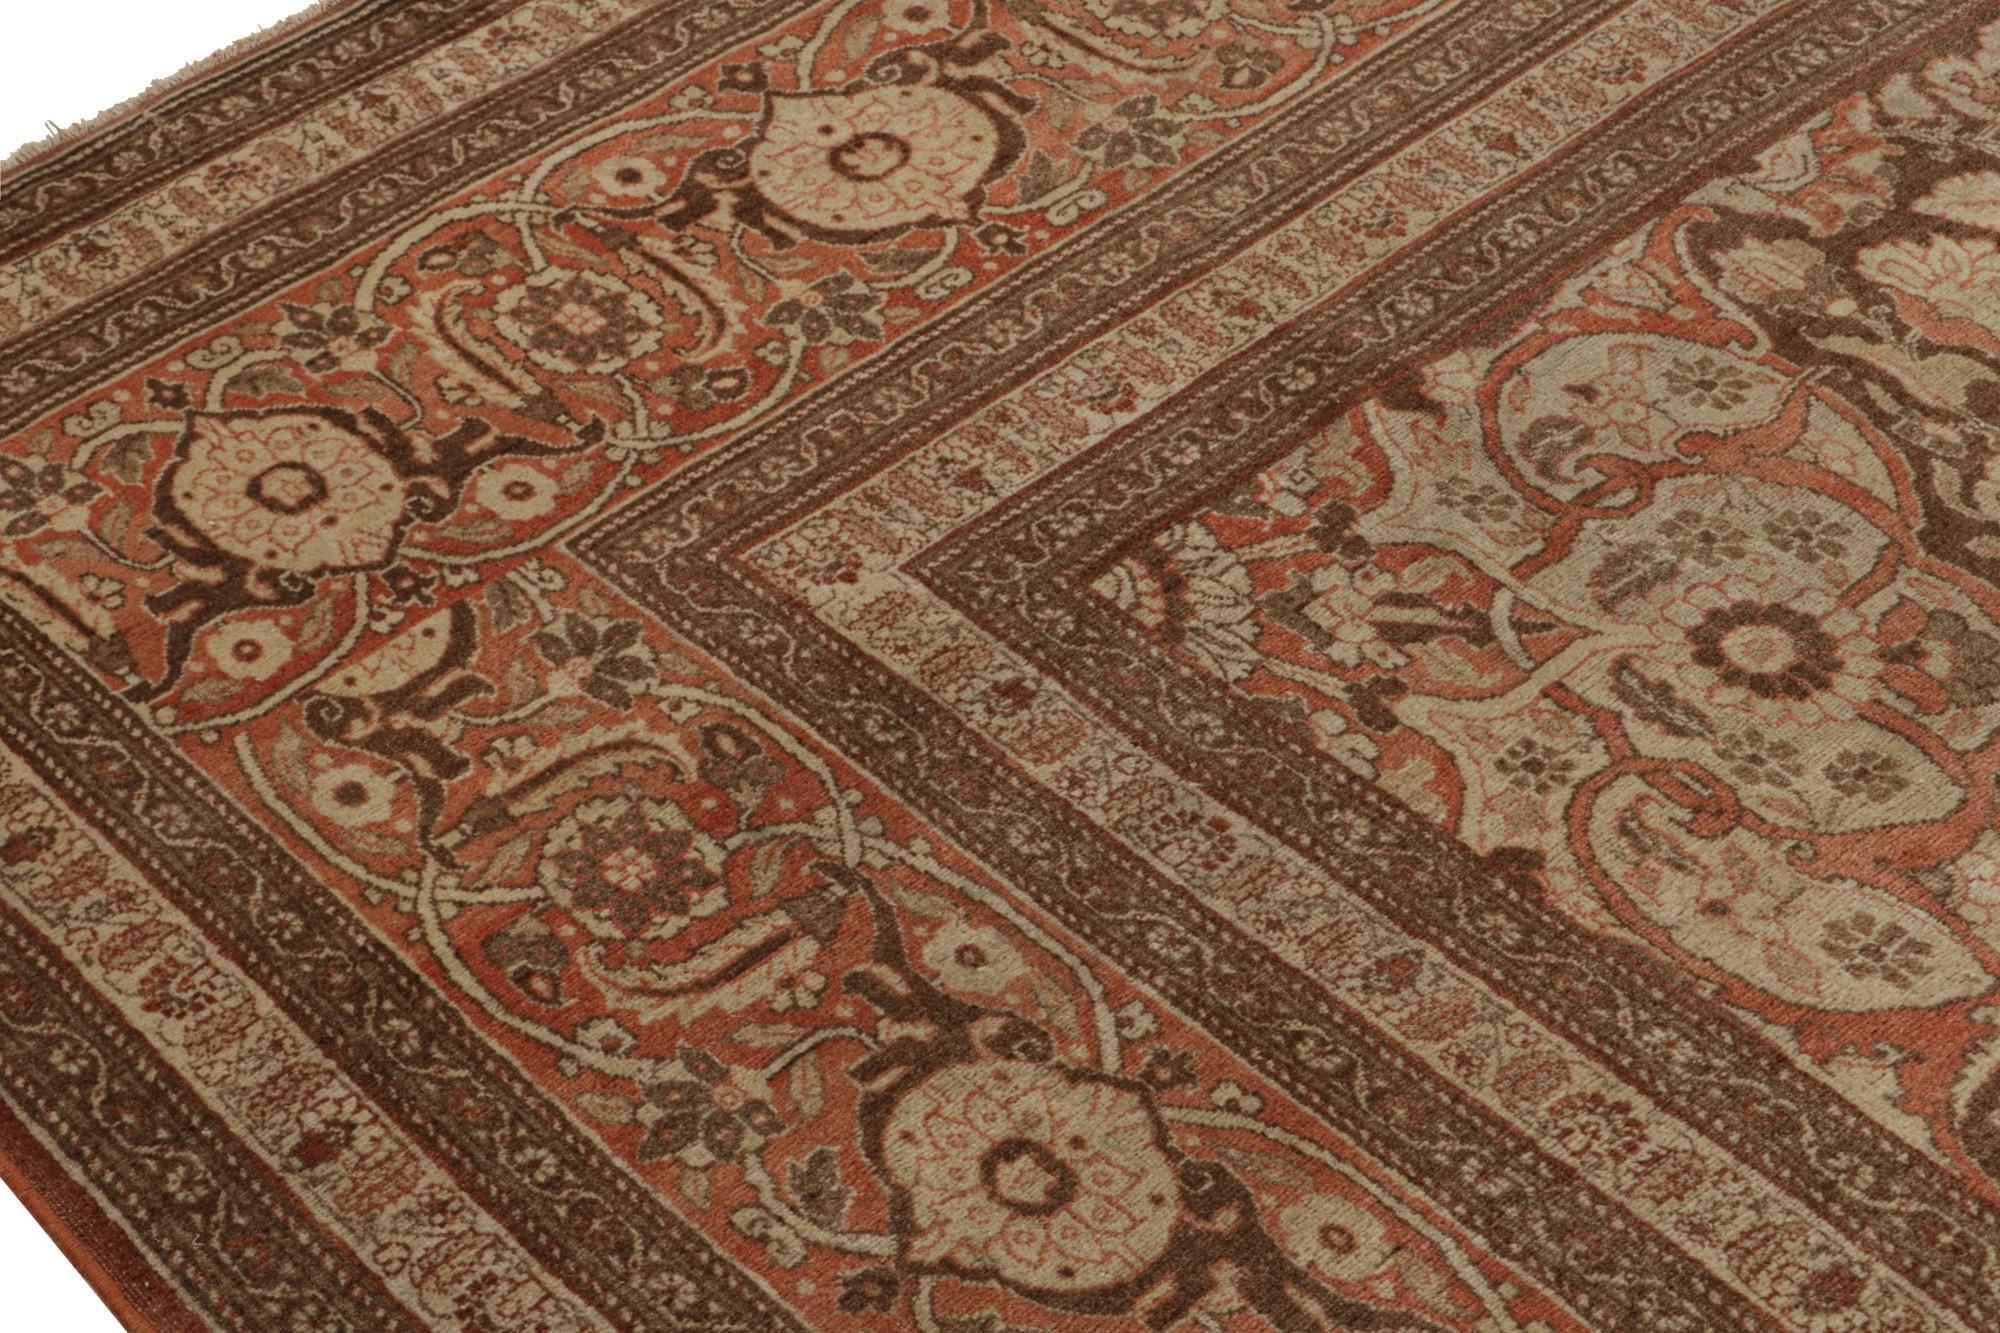 Late 19th Century Antique Persian Tabriz Rug, with Floral Patterns, from Rug & Kilim For Sale